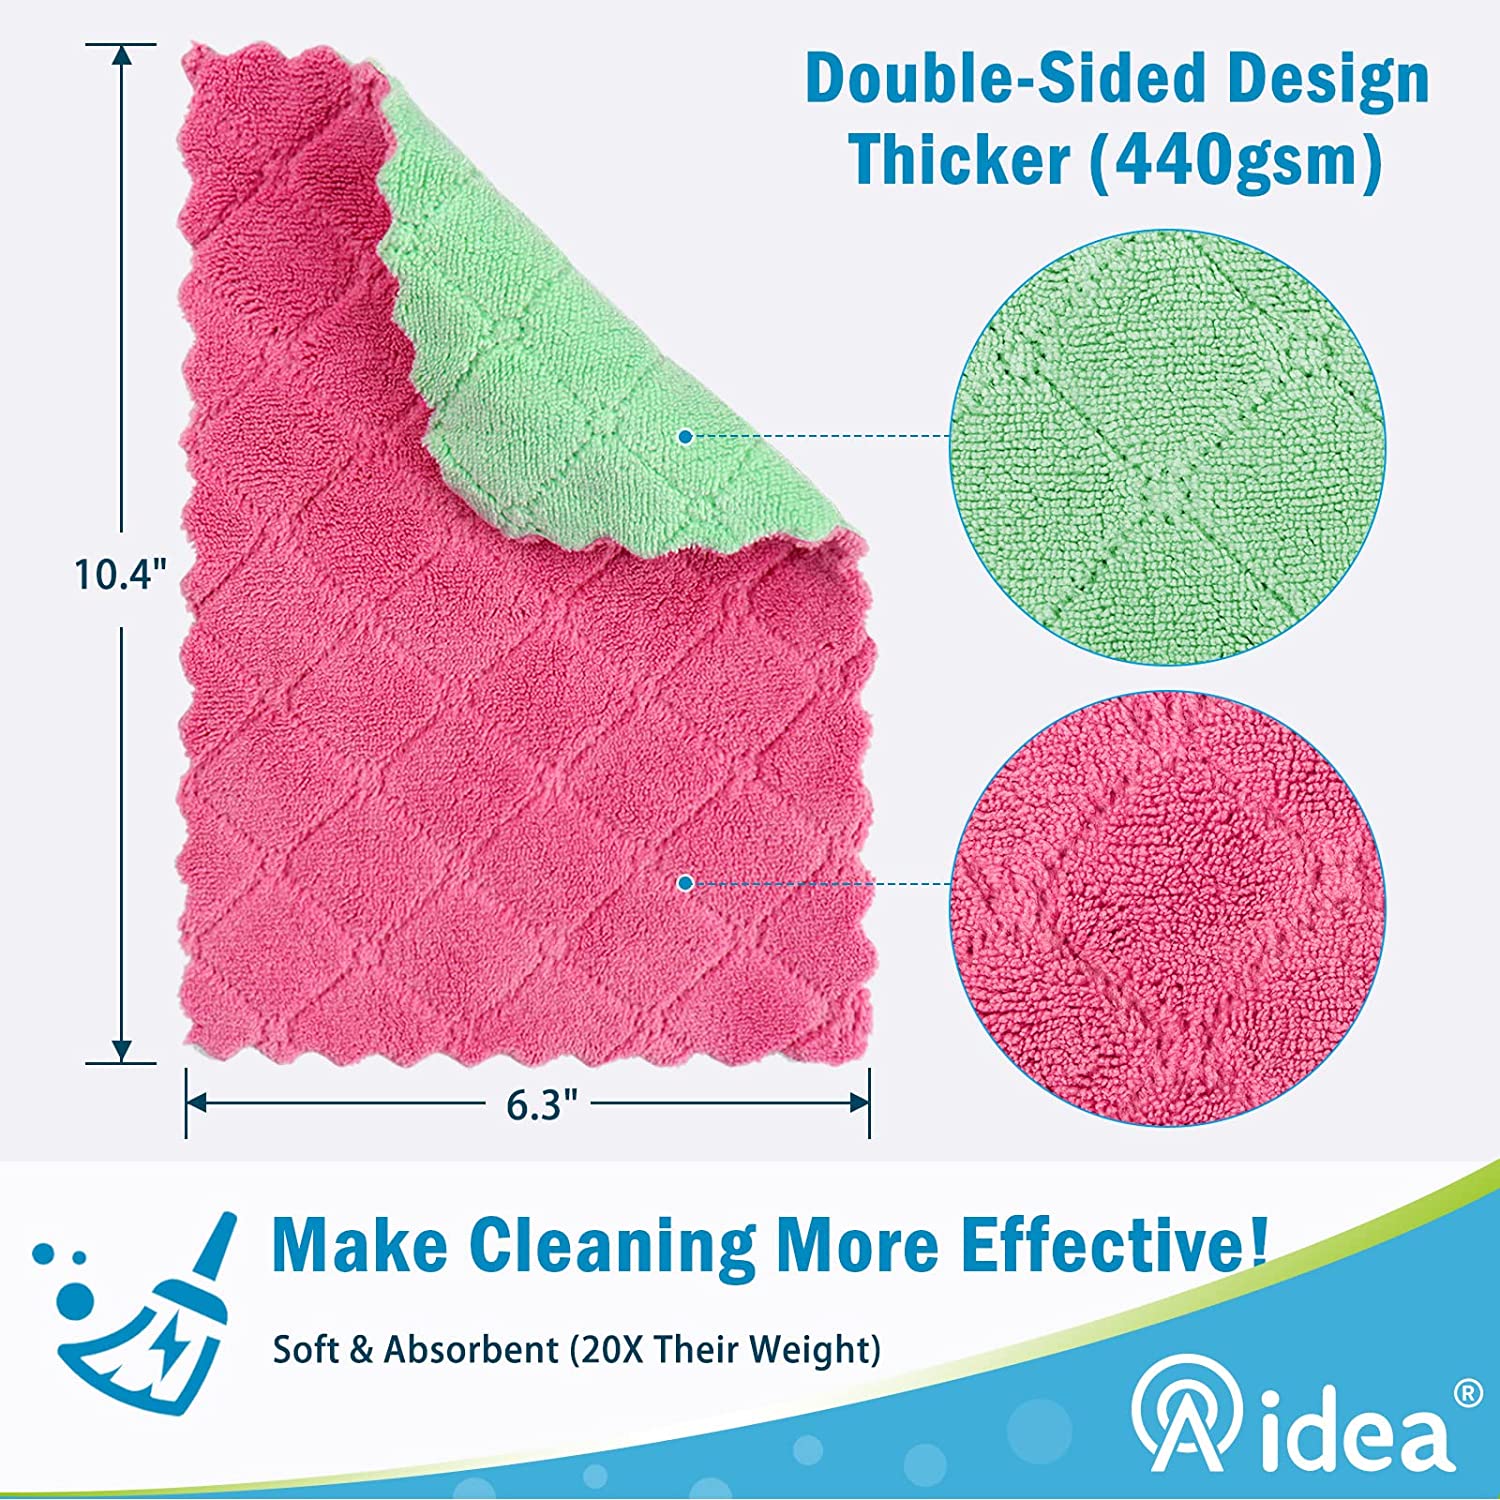 Kitchen Dish Cloths, Super Absorbent Microfiber Cleaning Cloth For